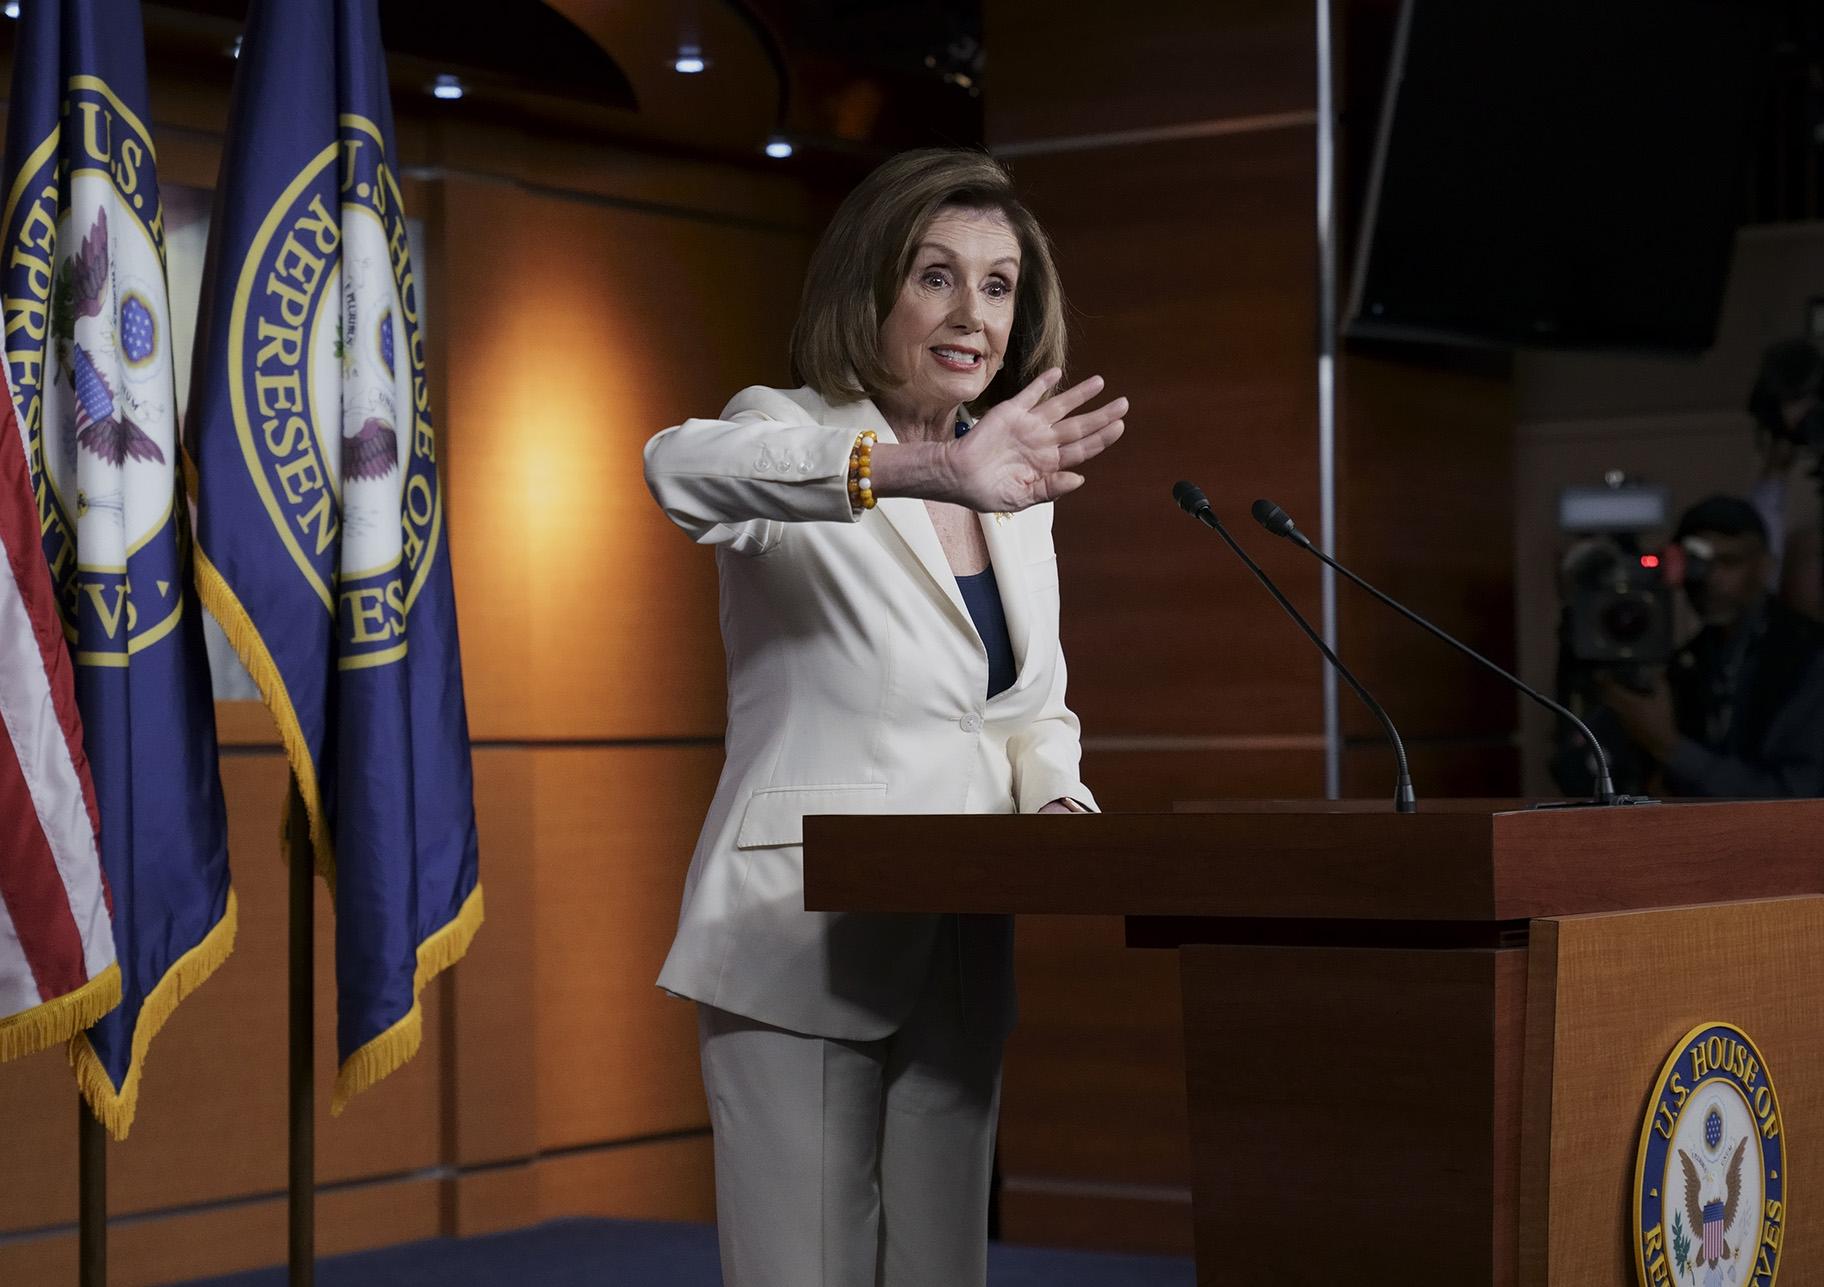 Speaker of the House Nancy Pelosi, D-Calif., responds forcefully to a question from a reporter who asked if she hated President Trump, after announcing earlier that the House is moving forward to draft articles of impeachment against Trump, at the Capitol in Washington, Thursday, Dec. 5, 2019. (AP Photo / J. Scott Applewhite)